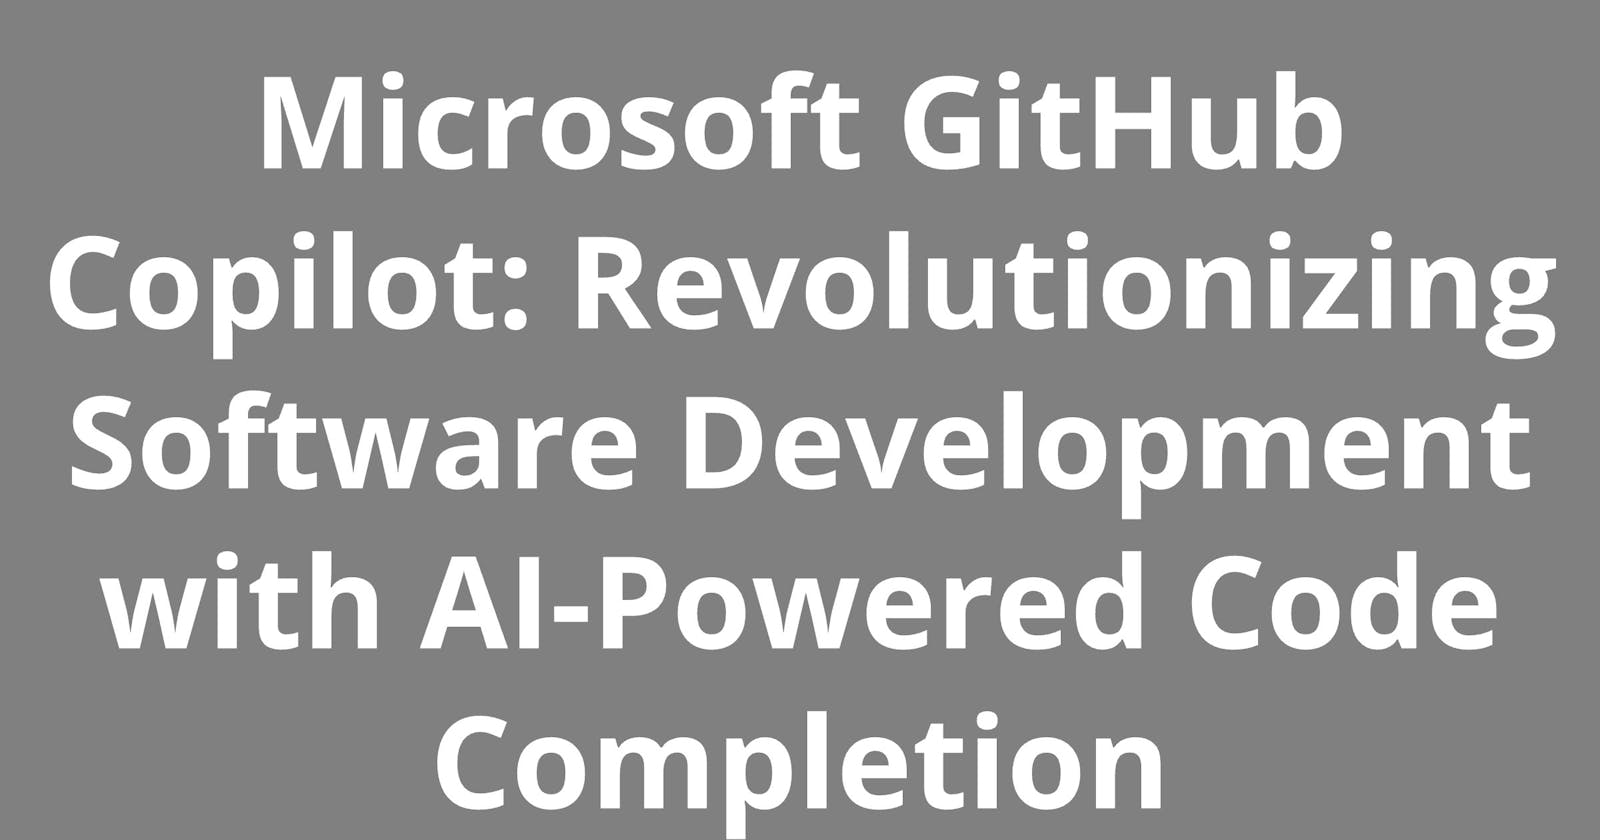 Microsoft GitHub Copilot: Revolutionizing Software Development with AI-Powered Code Completion